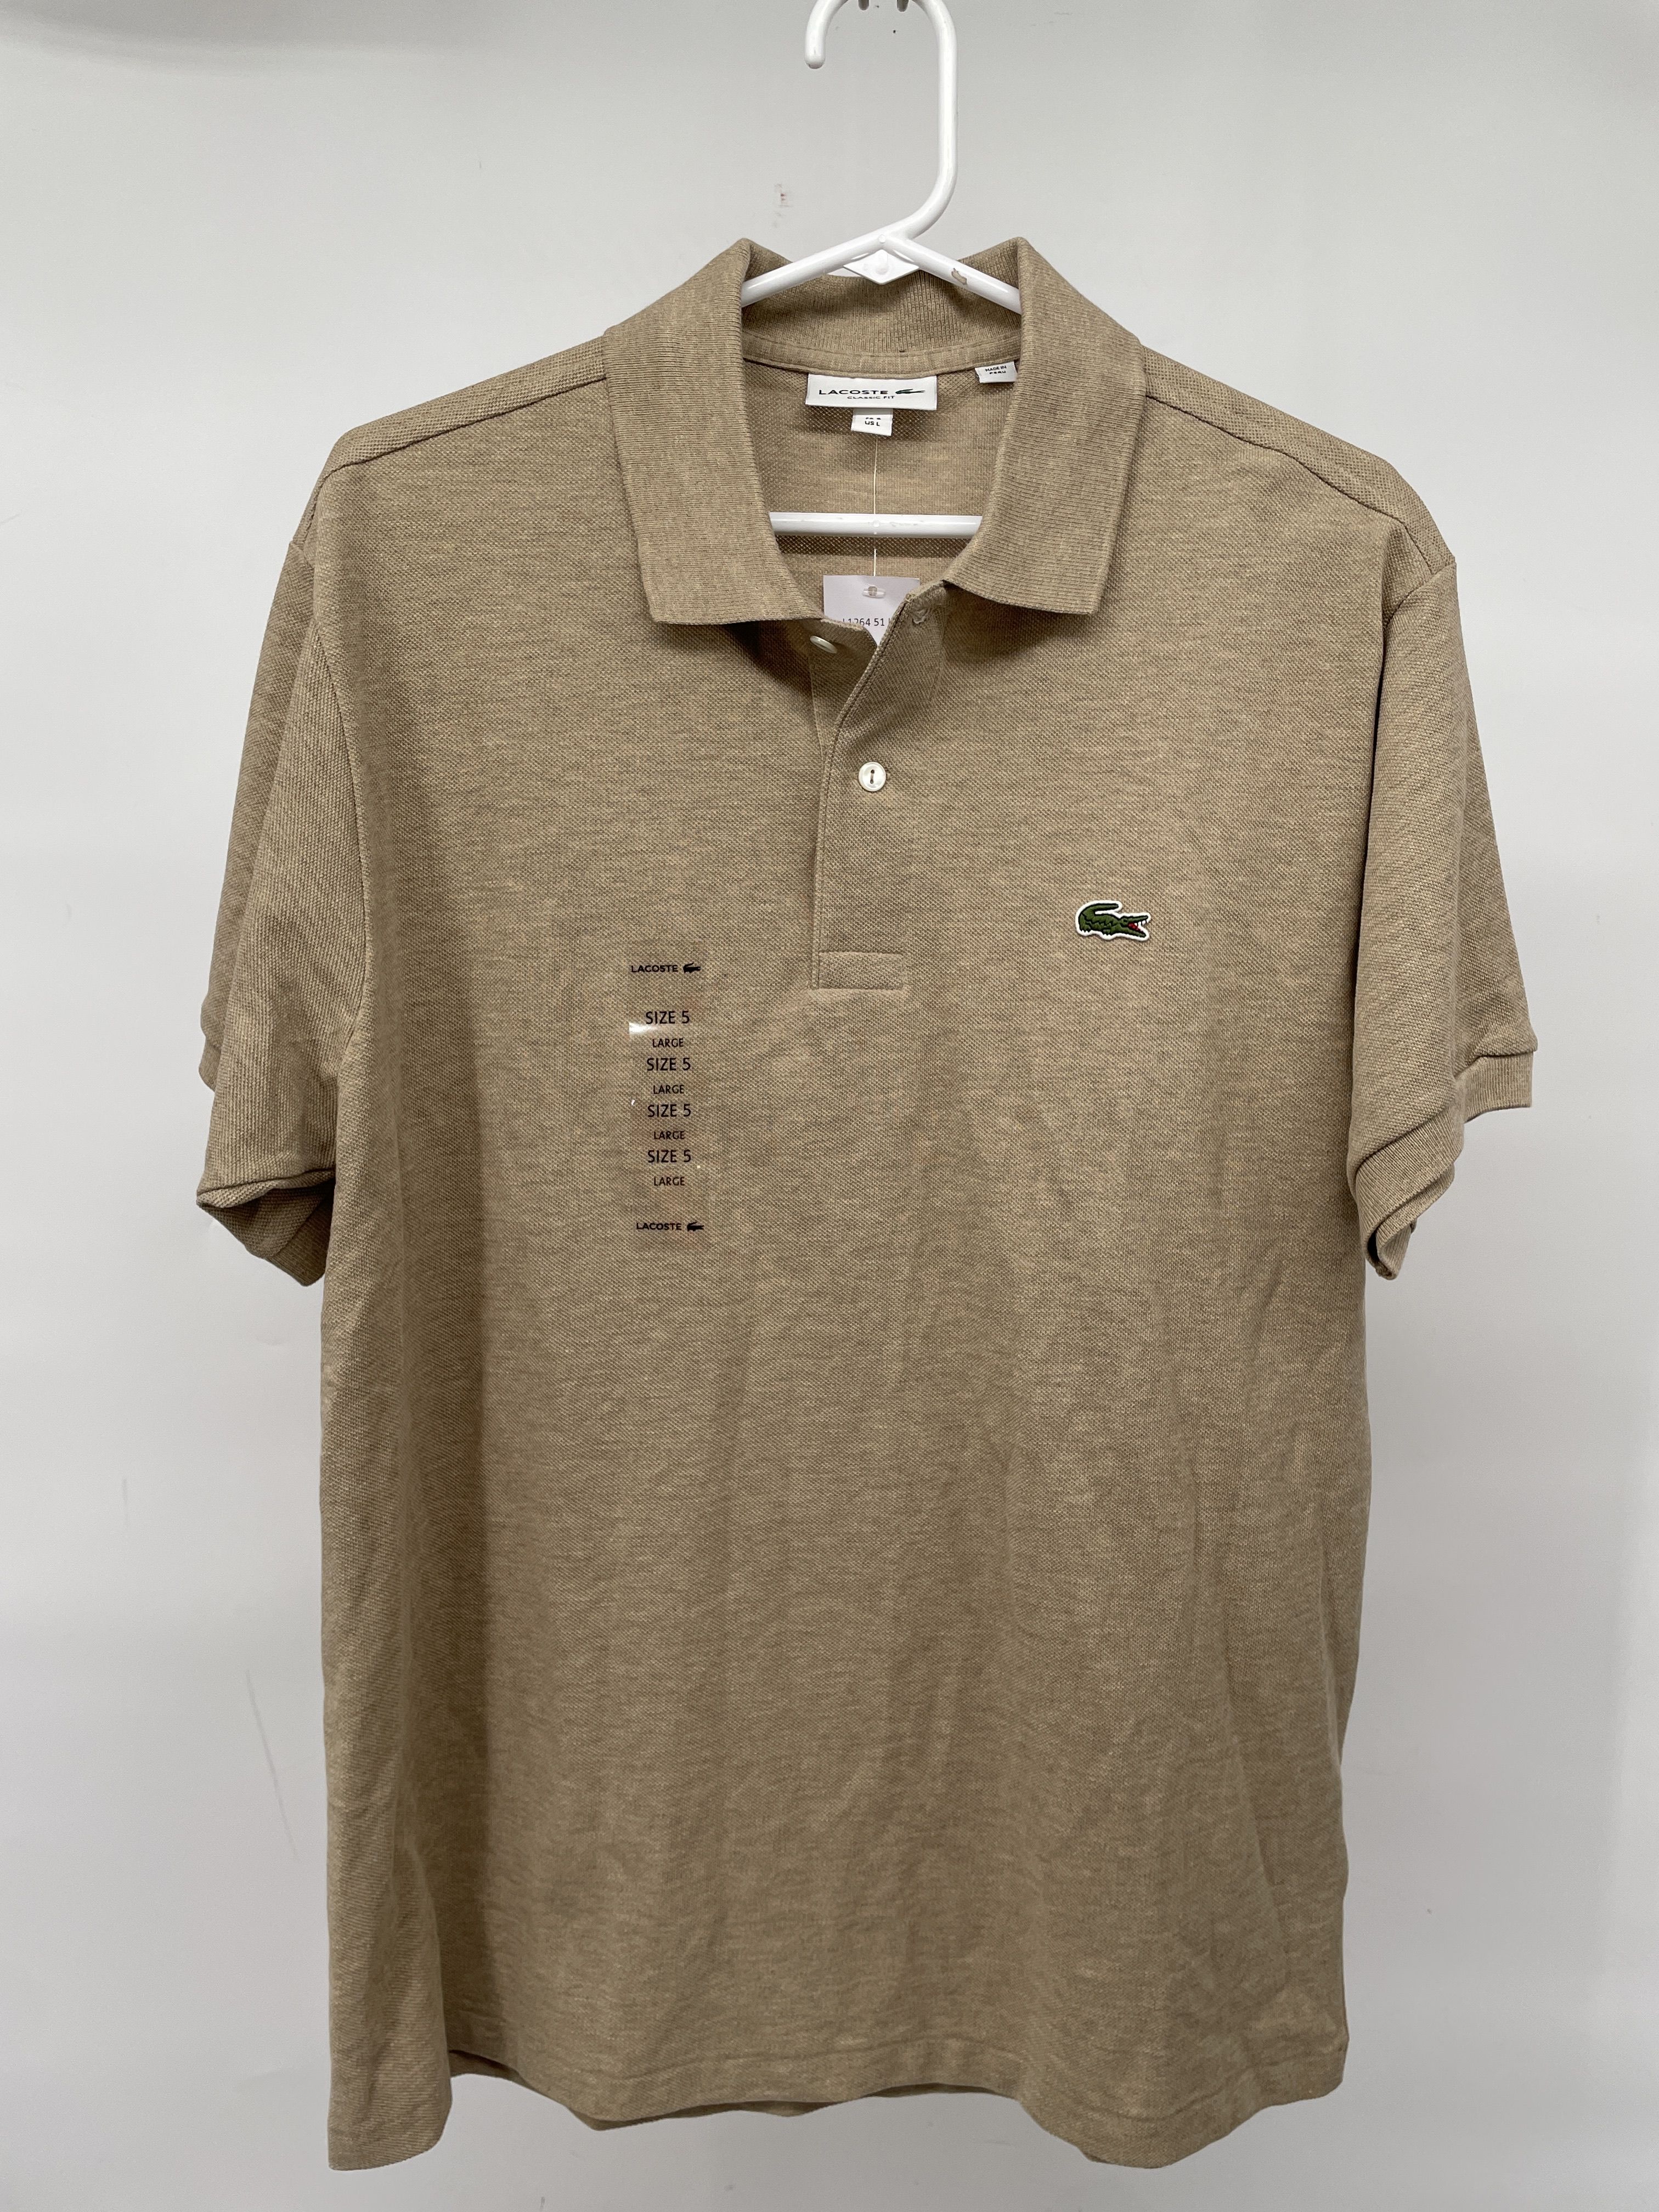 Buy Mens Khaki Heather Cotton Classic Fit Polo Shirt Size Large T-0545561-J  for USD 21.99 | GoodwillFinds